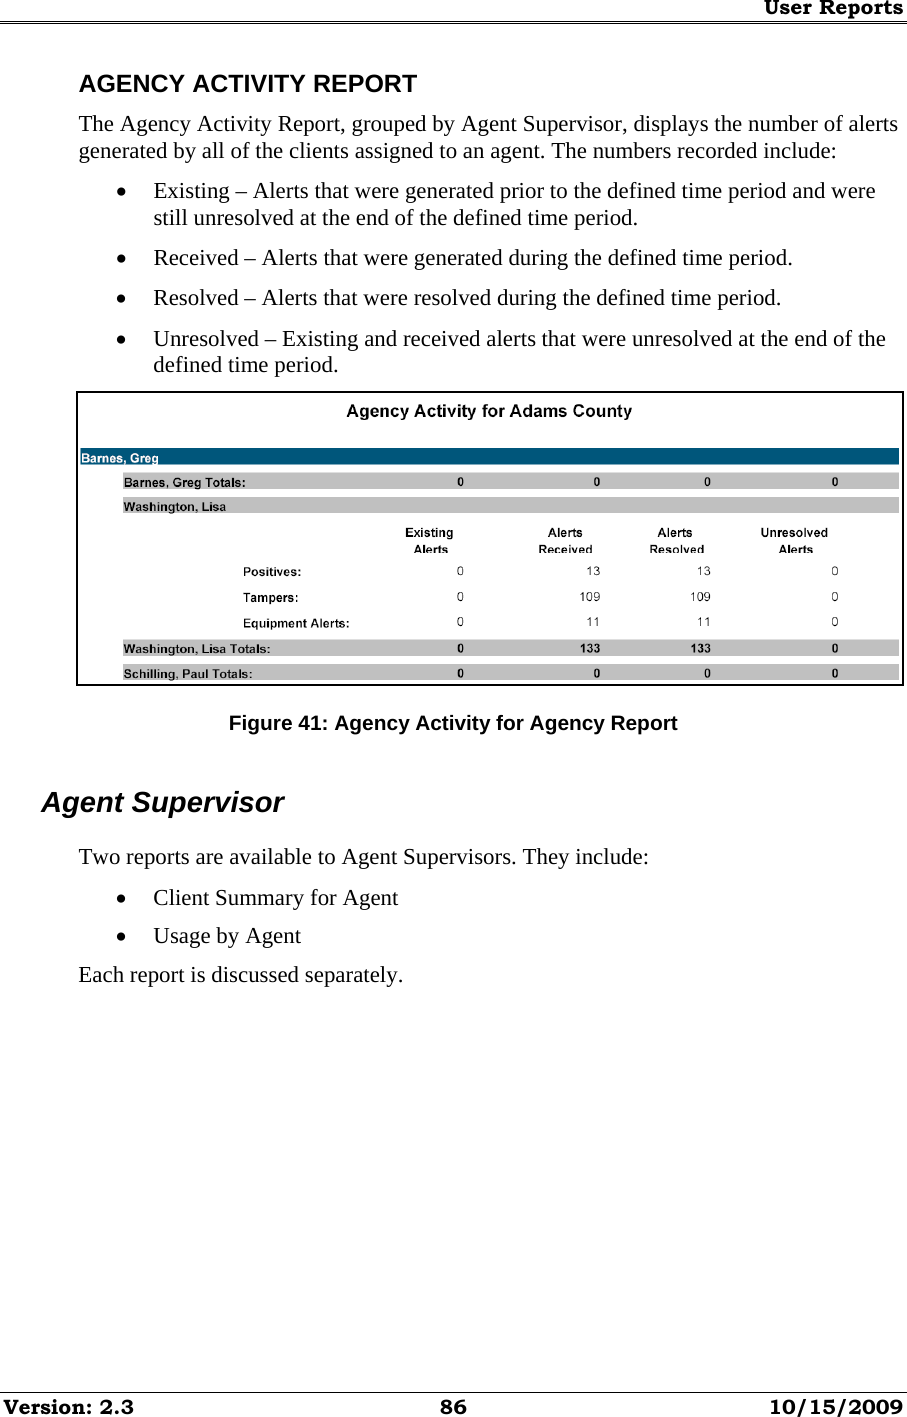 User Reports Version: 2.3  86  10/15/2009 AGENCY ACTIVITY REPORT The Agency Activity Report, grouped by Agent Supervisor, displays the number of alerts generated by all of the clients assigned to an agent. The numbers recorded include: • Existing – Alerts that were generated prior to the defined time period and were still unresolved at the end of the defined time period. • Received – Alerts that were generated during the defined time period. • Resolved – Alerts that were resolved during the defined time period. • Unresolved – Existing and received alerts that were unresolved at the end of the defined time period.  Figure 41: Agency Activity for Agency Report Agent Supervisor Two reports are available to Agent Supervisors. They include: • Client Summary for Agent • Usage by Agent Each report is discussed separately. 